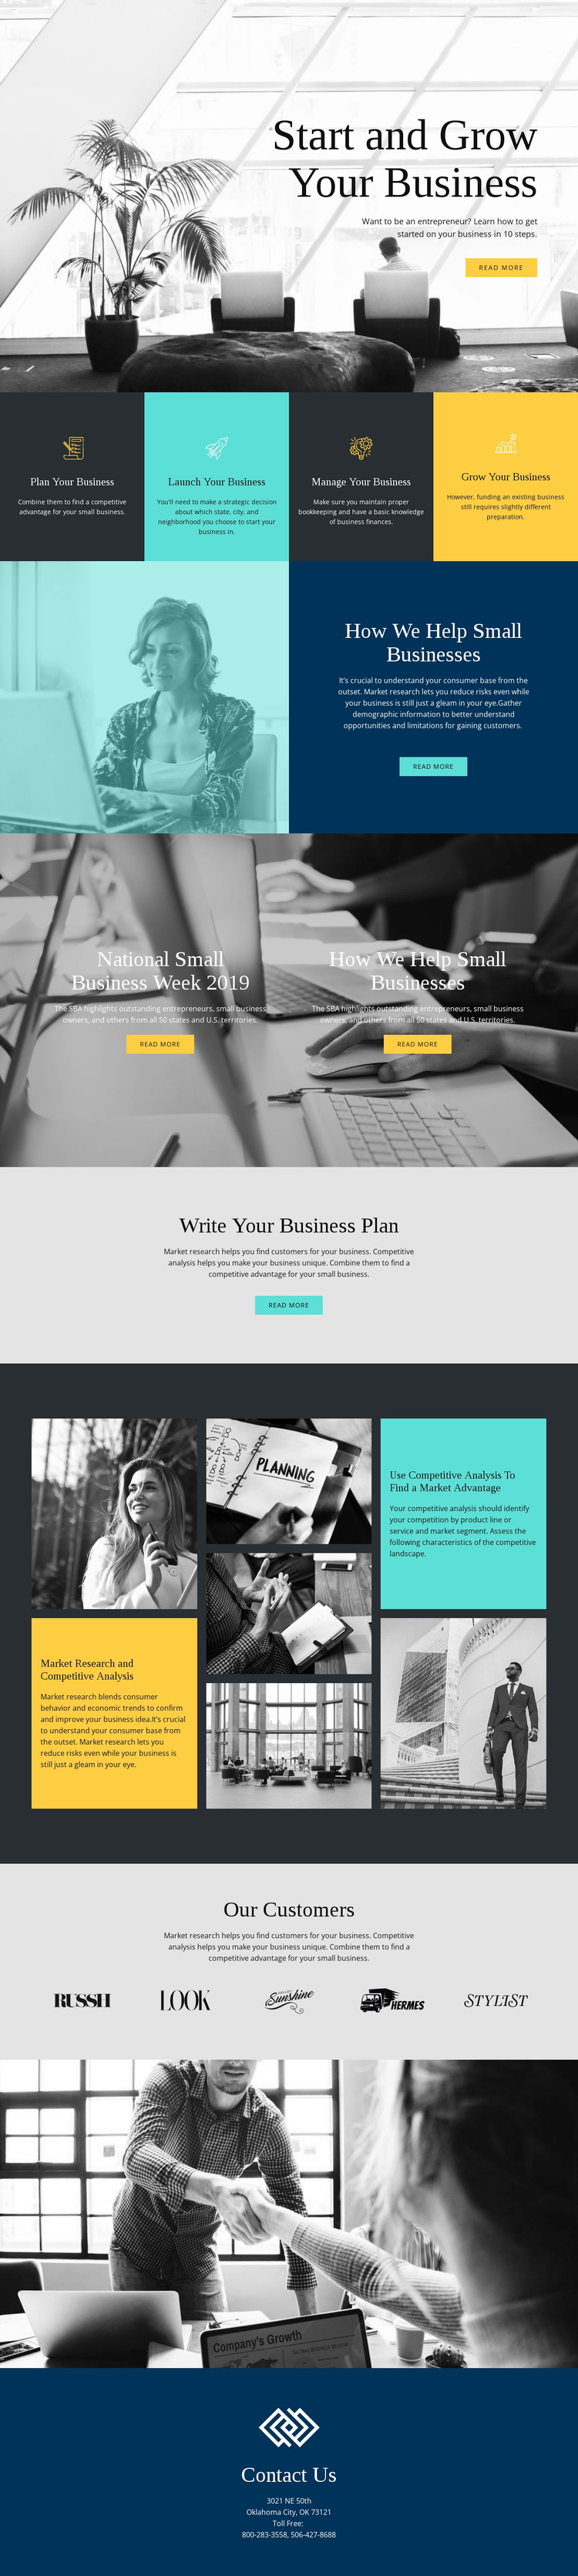 Start and grow your business Template